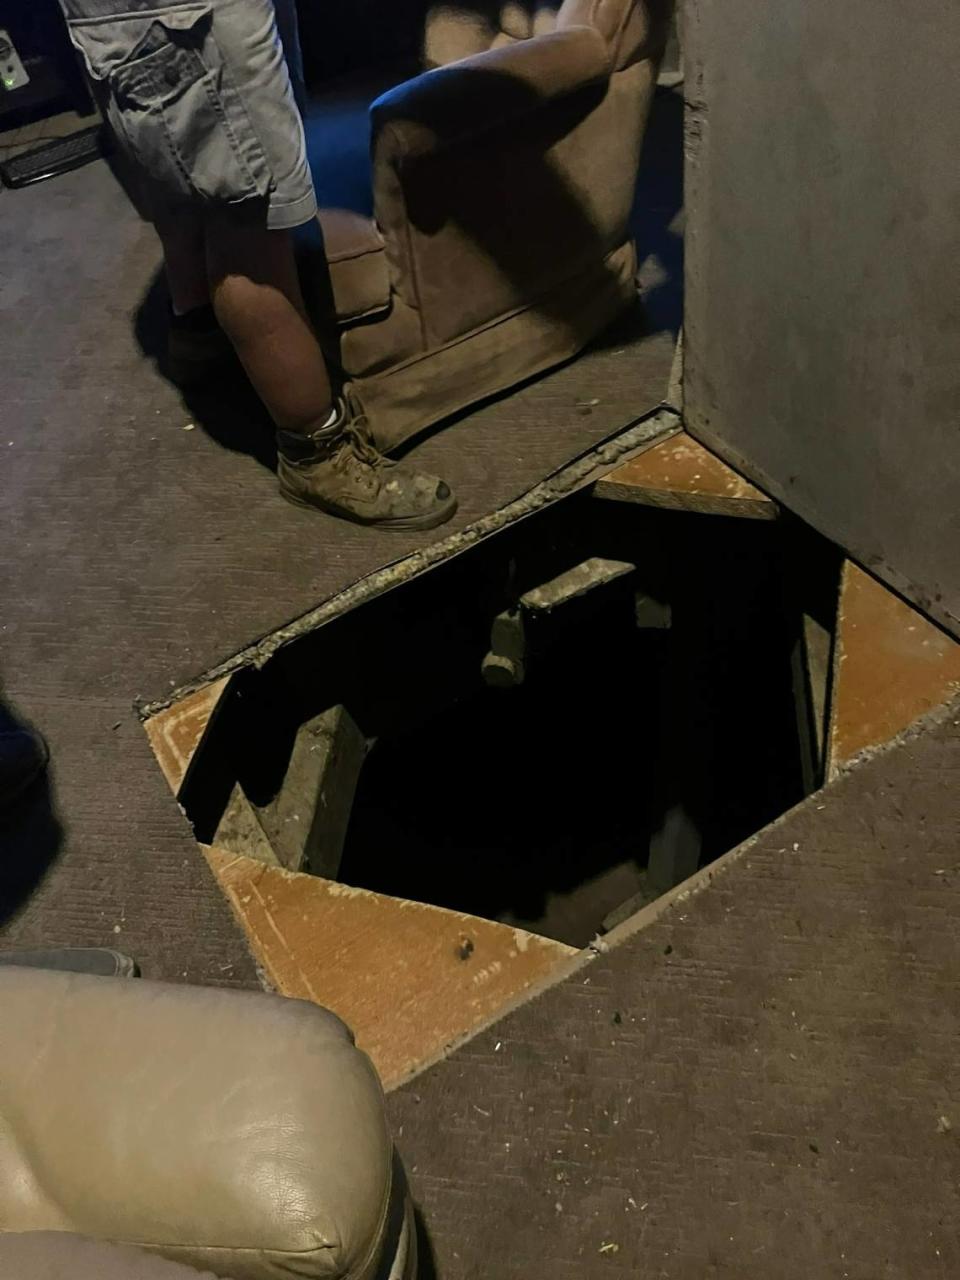 A trapdoor leads to the basement at the unlicensed Blossom House Haunted Hotel, says Aaron Jacobsen, who visited last weekend.